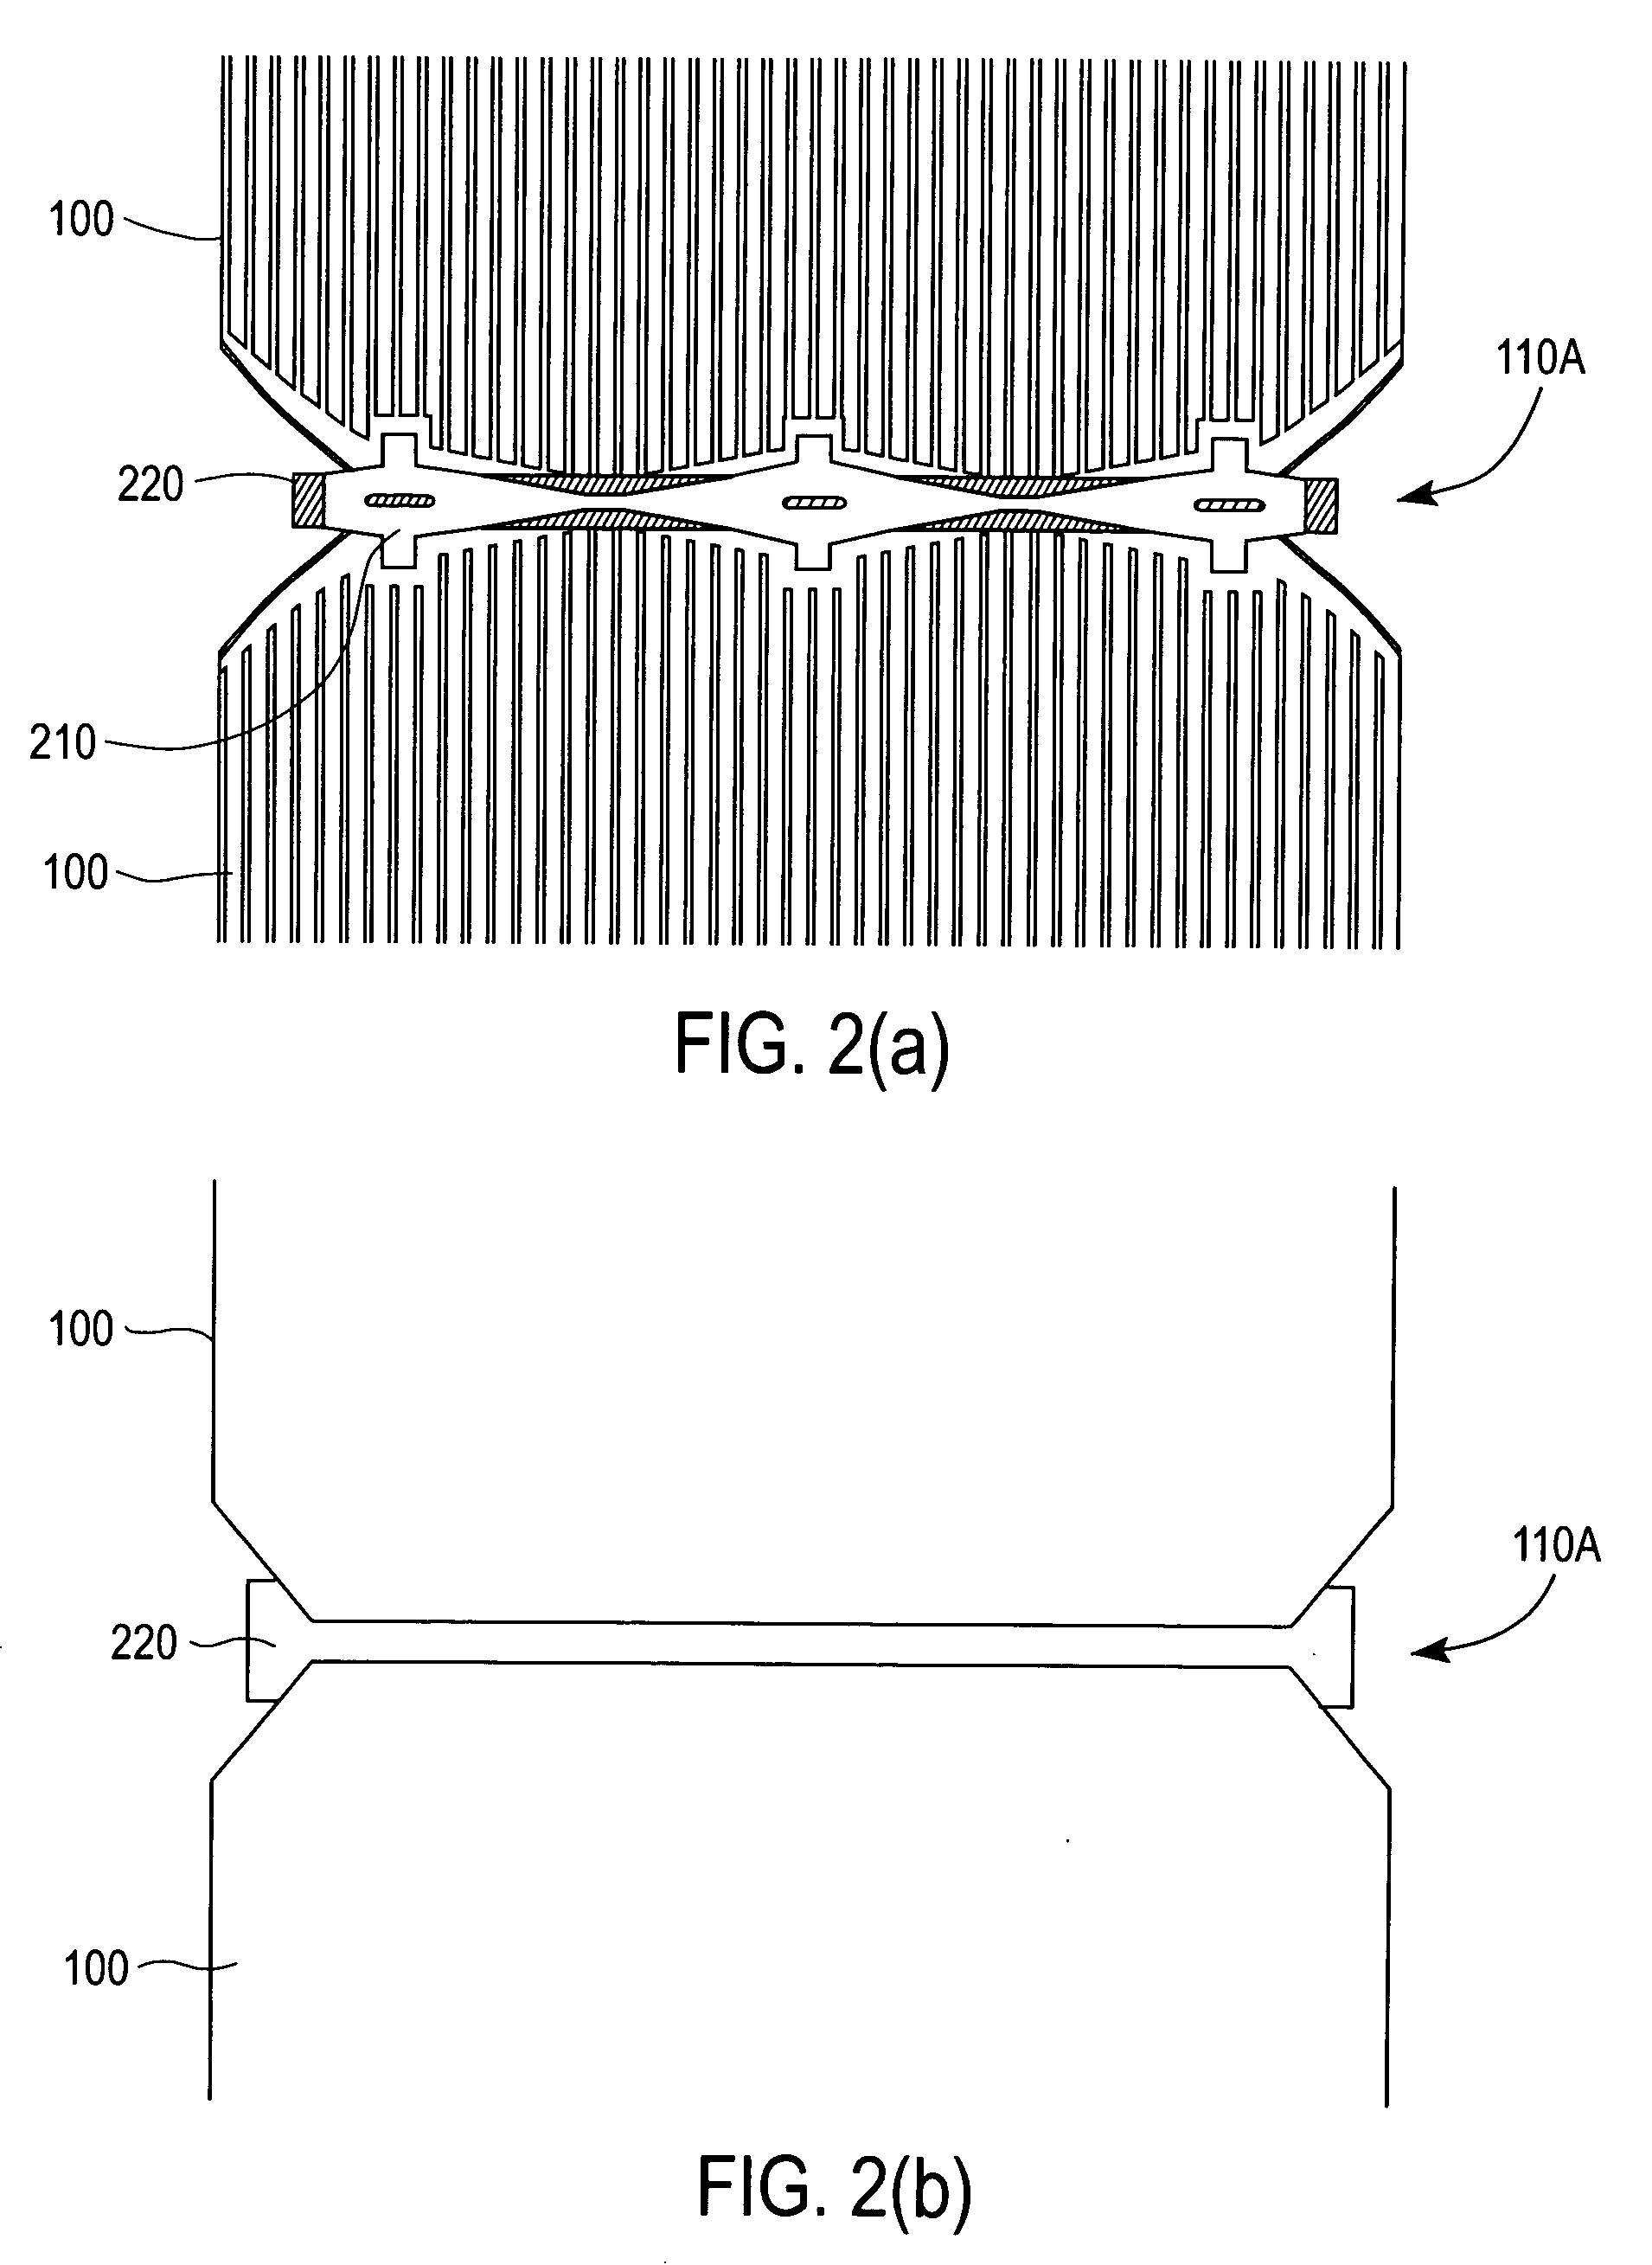 Interconnection of solar cells in a solar cell module